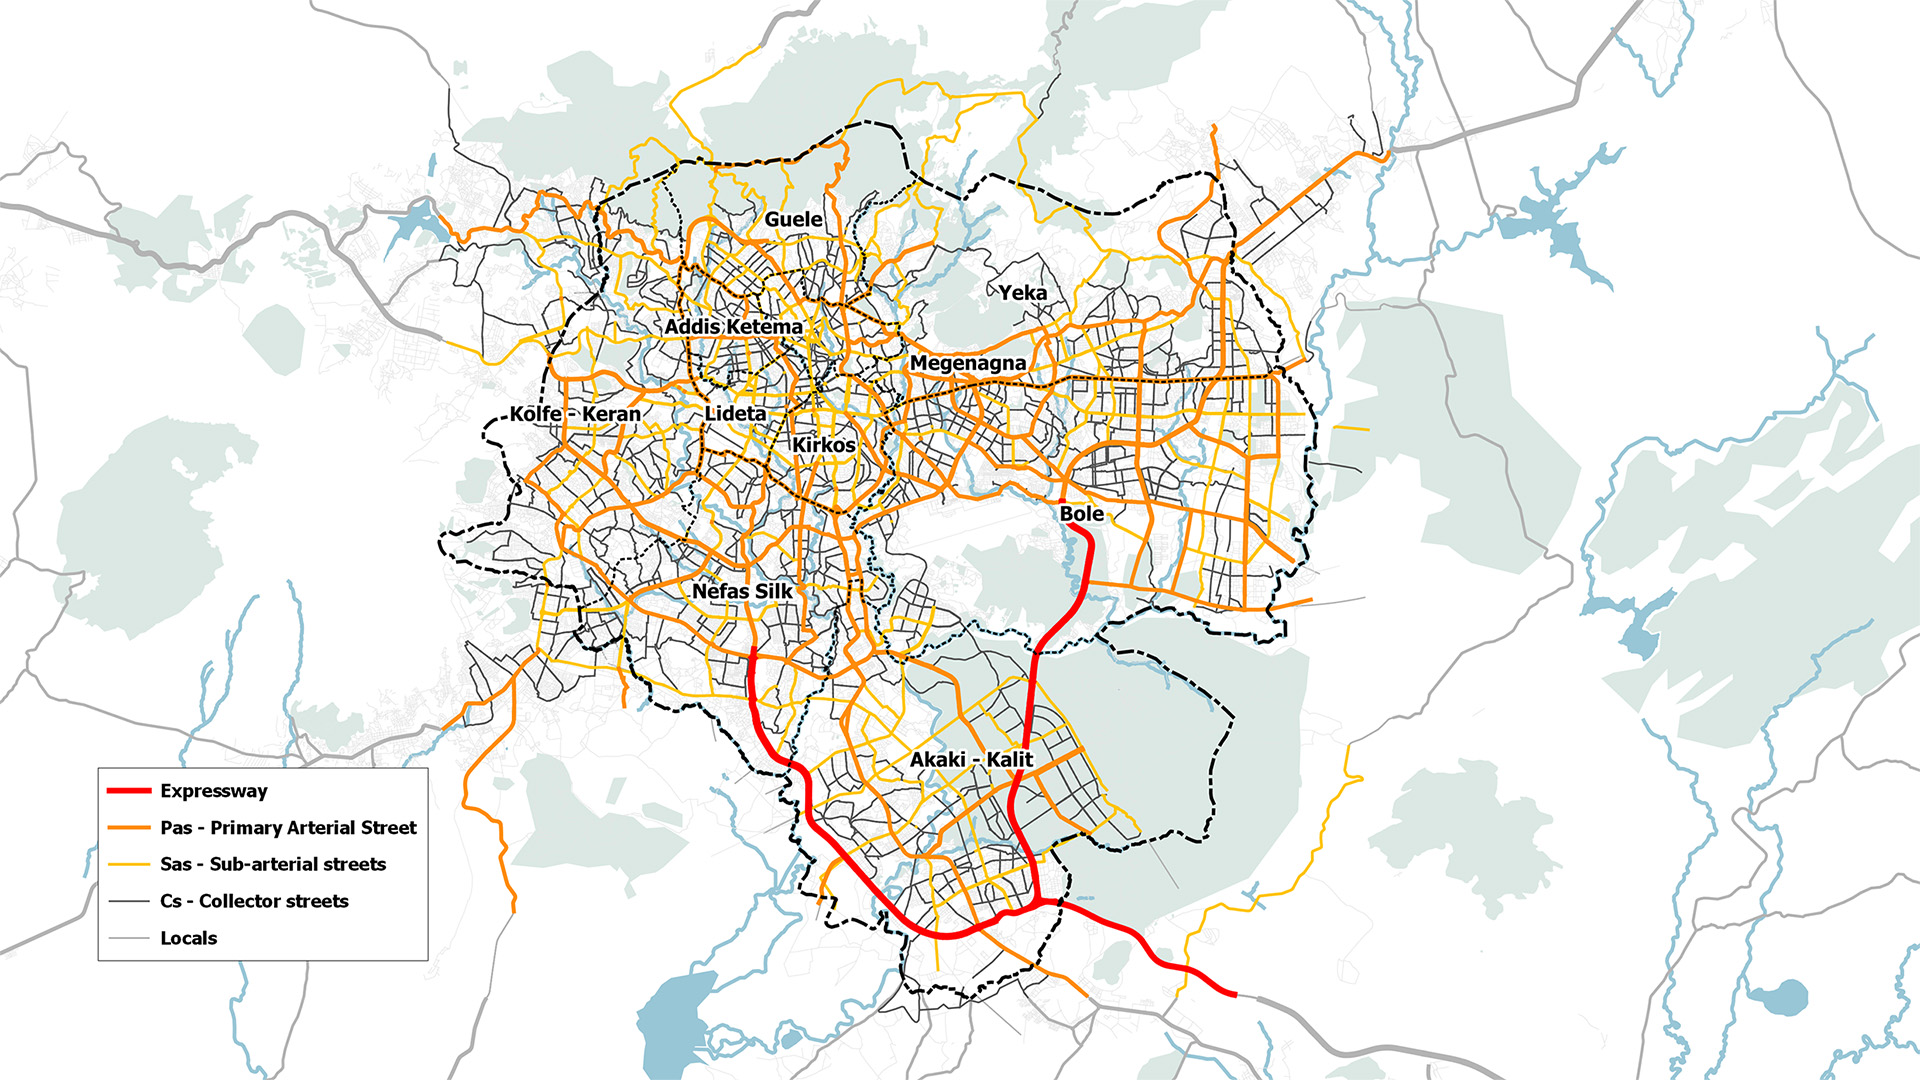 Proposed road network